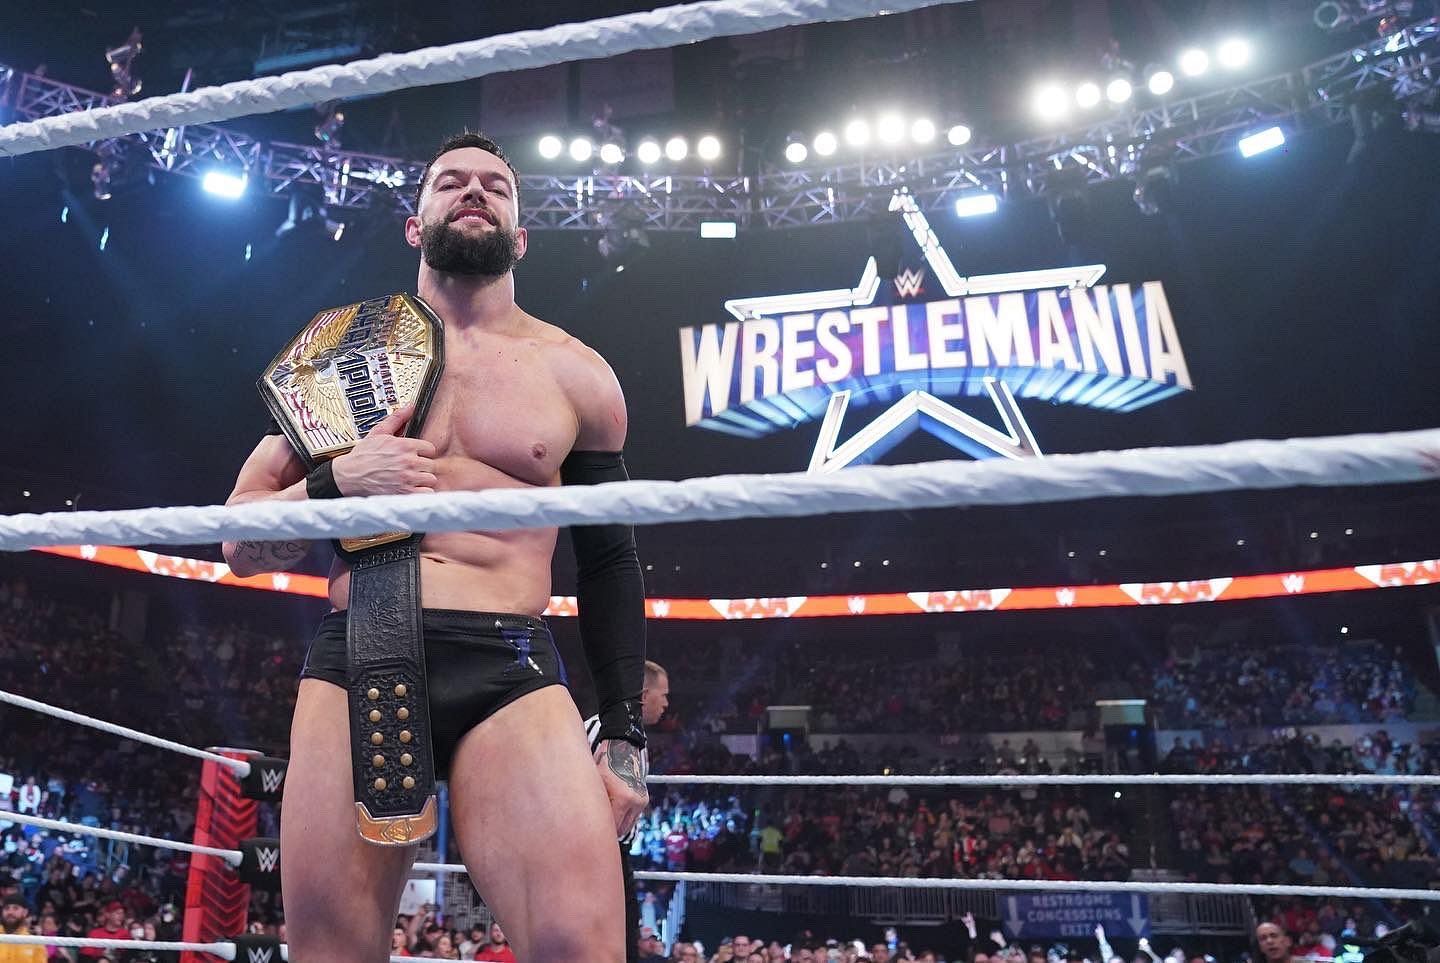 Finn Balor is the current WWE United States Champion